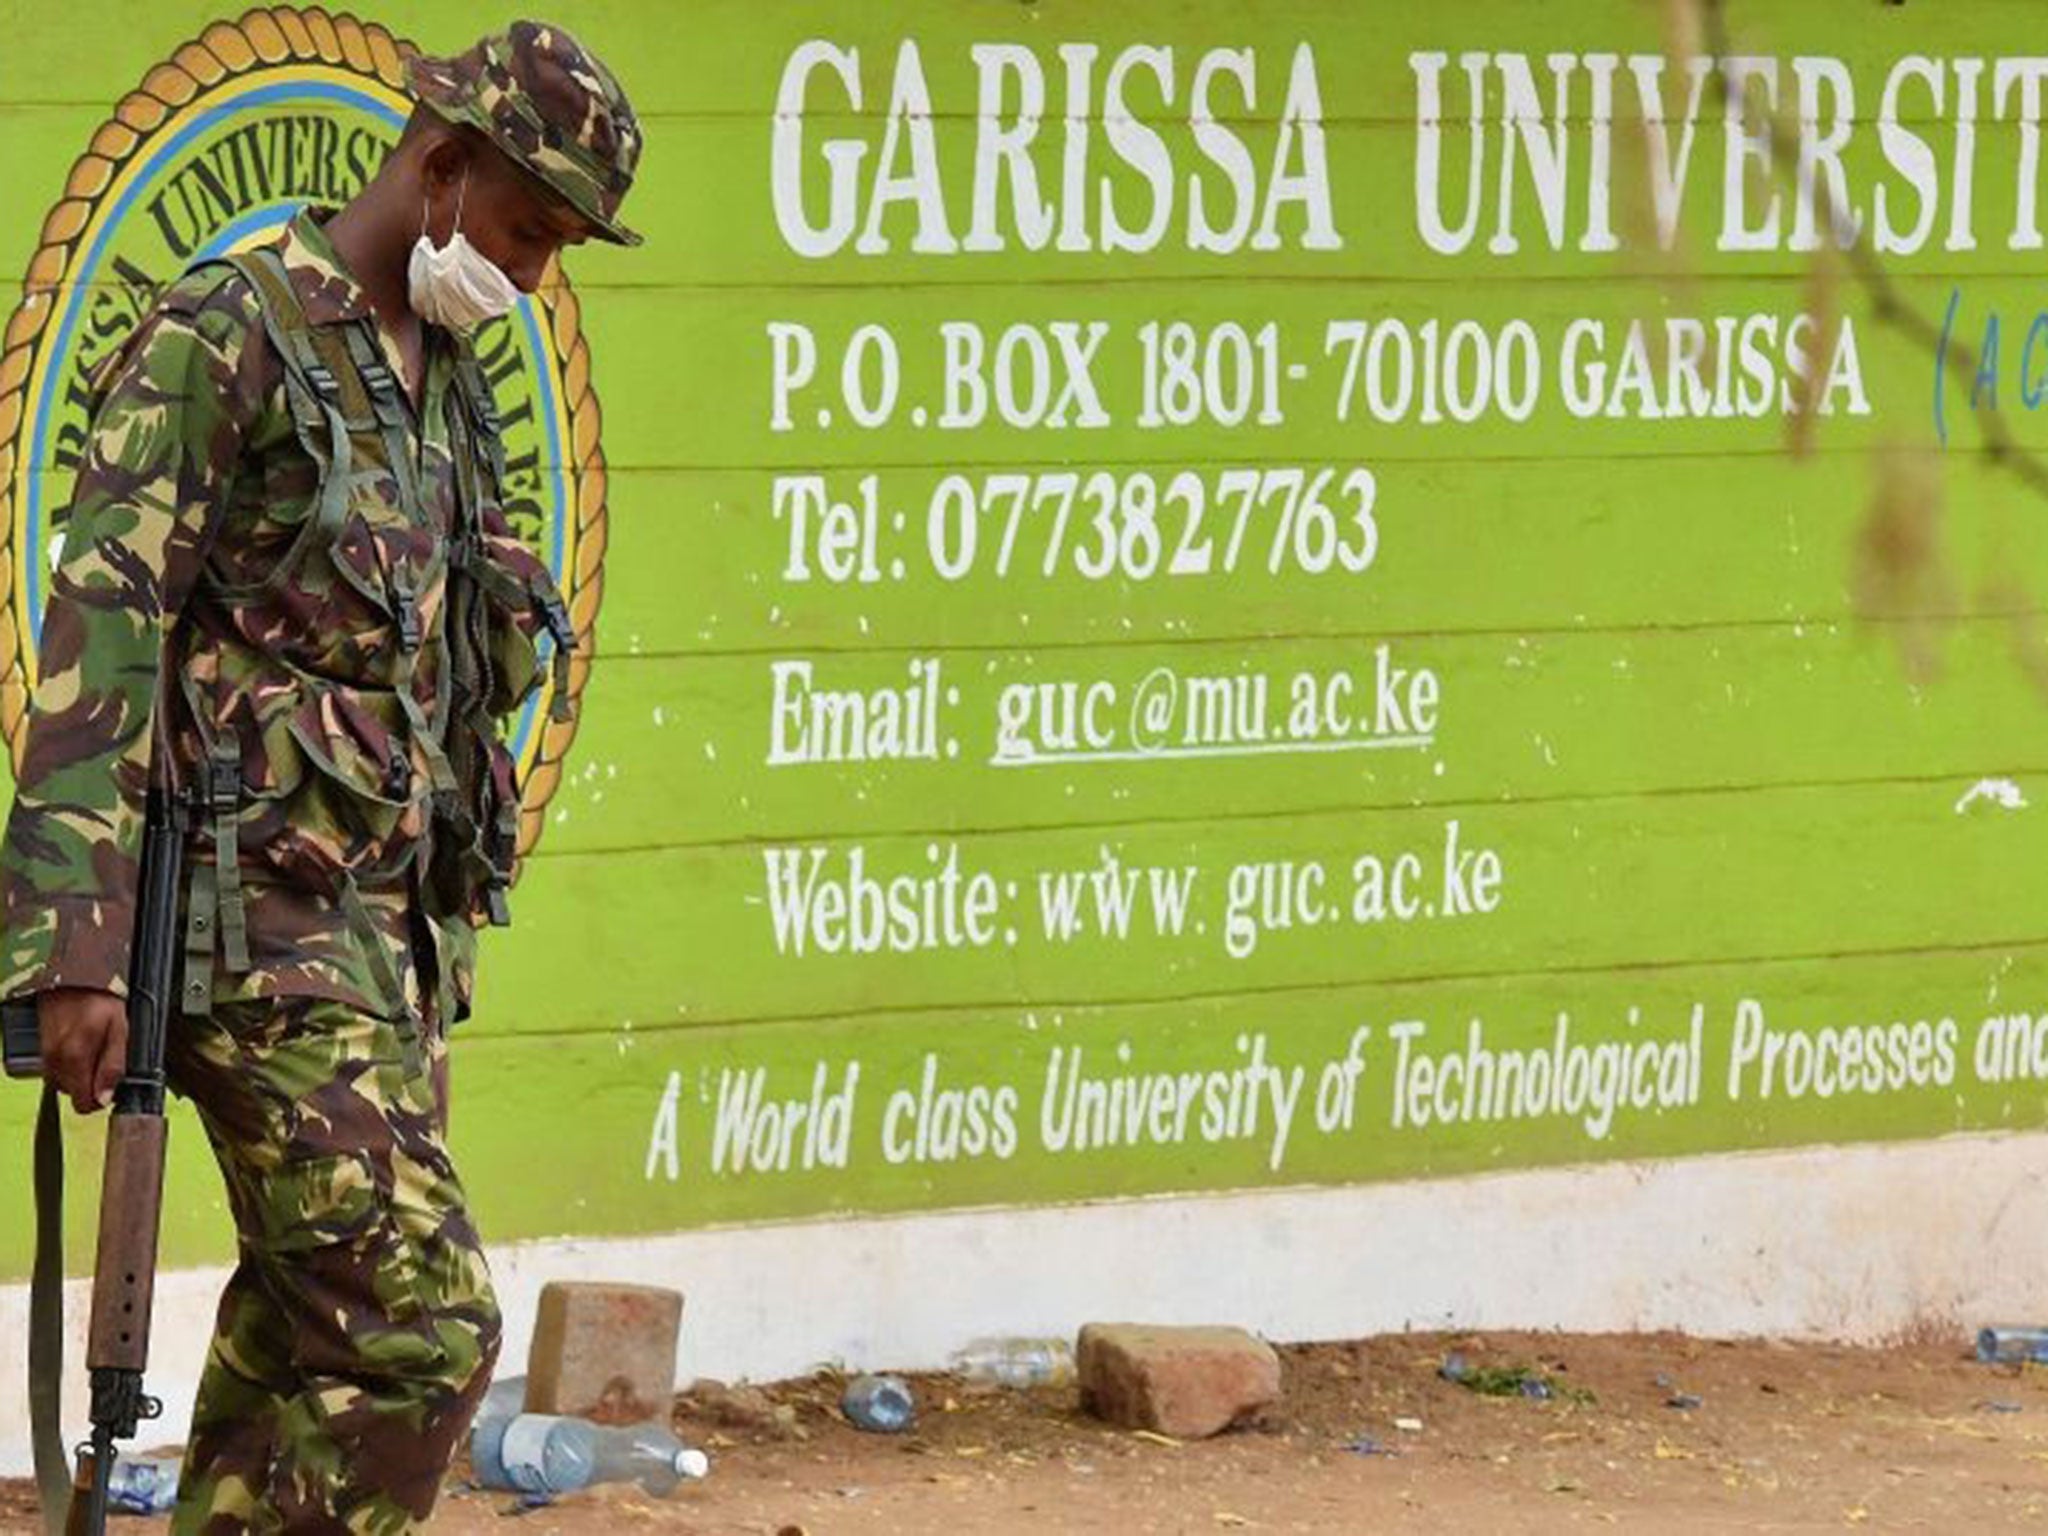 A Kenya Defence forces soldier walks past the front entrance of Garissa University College